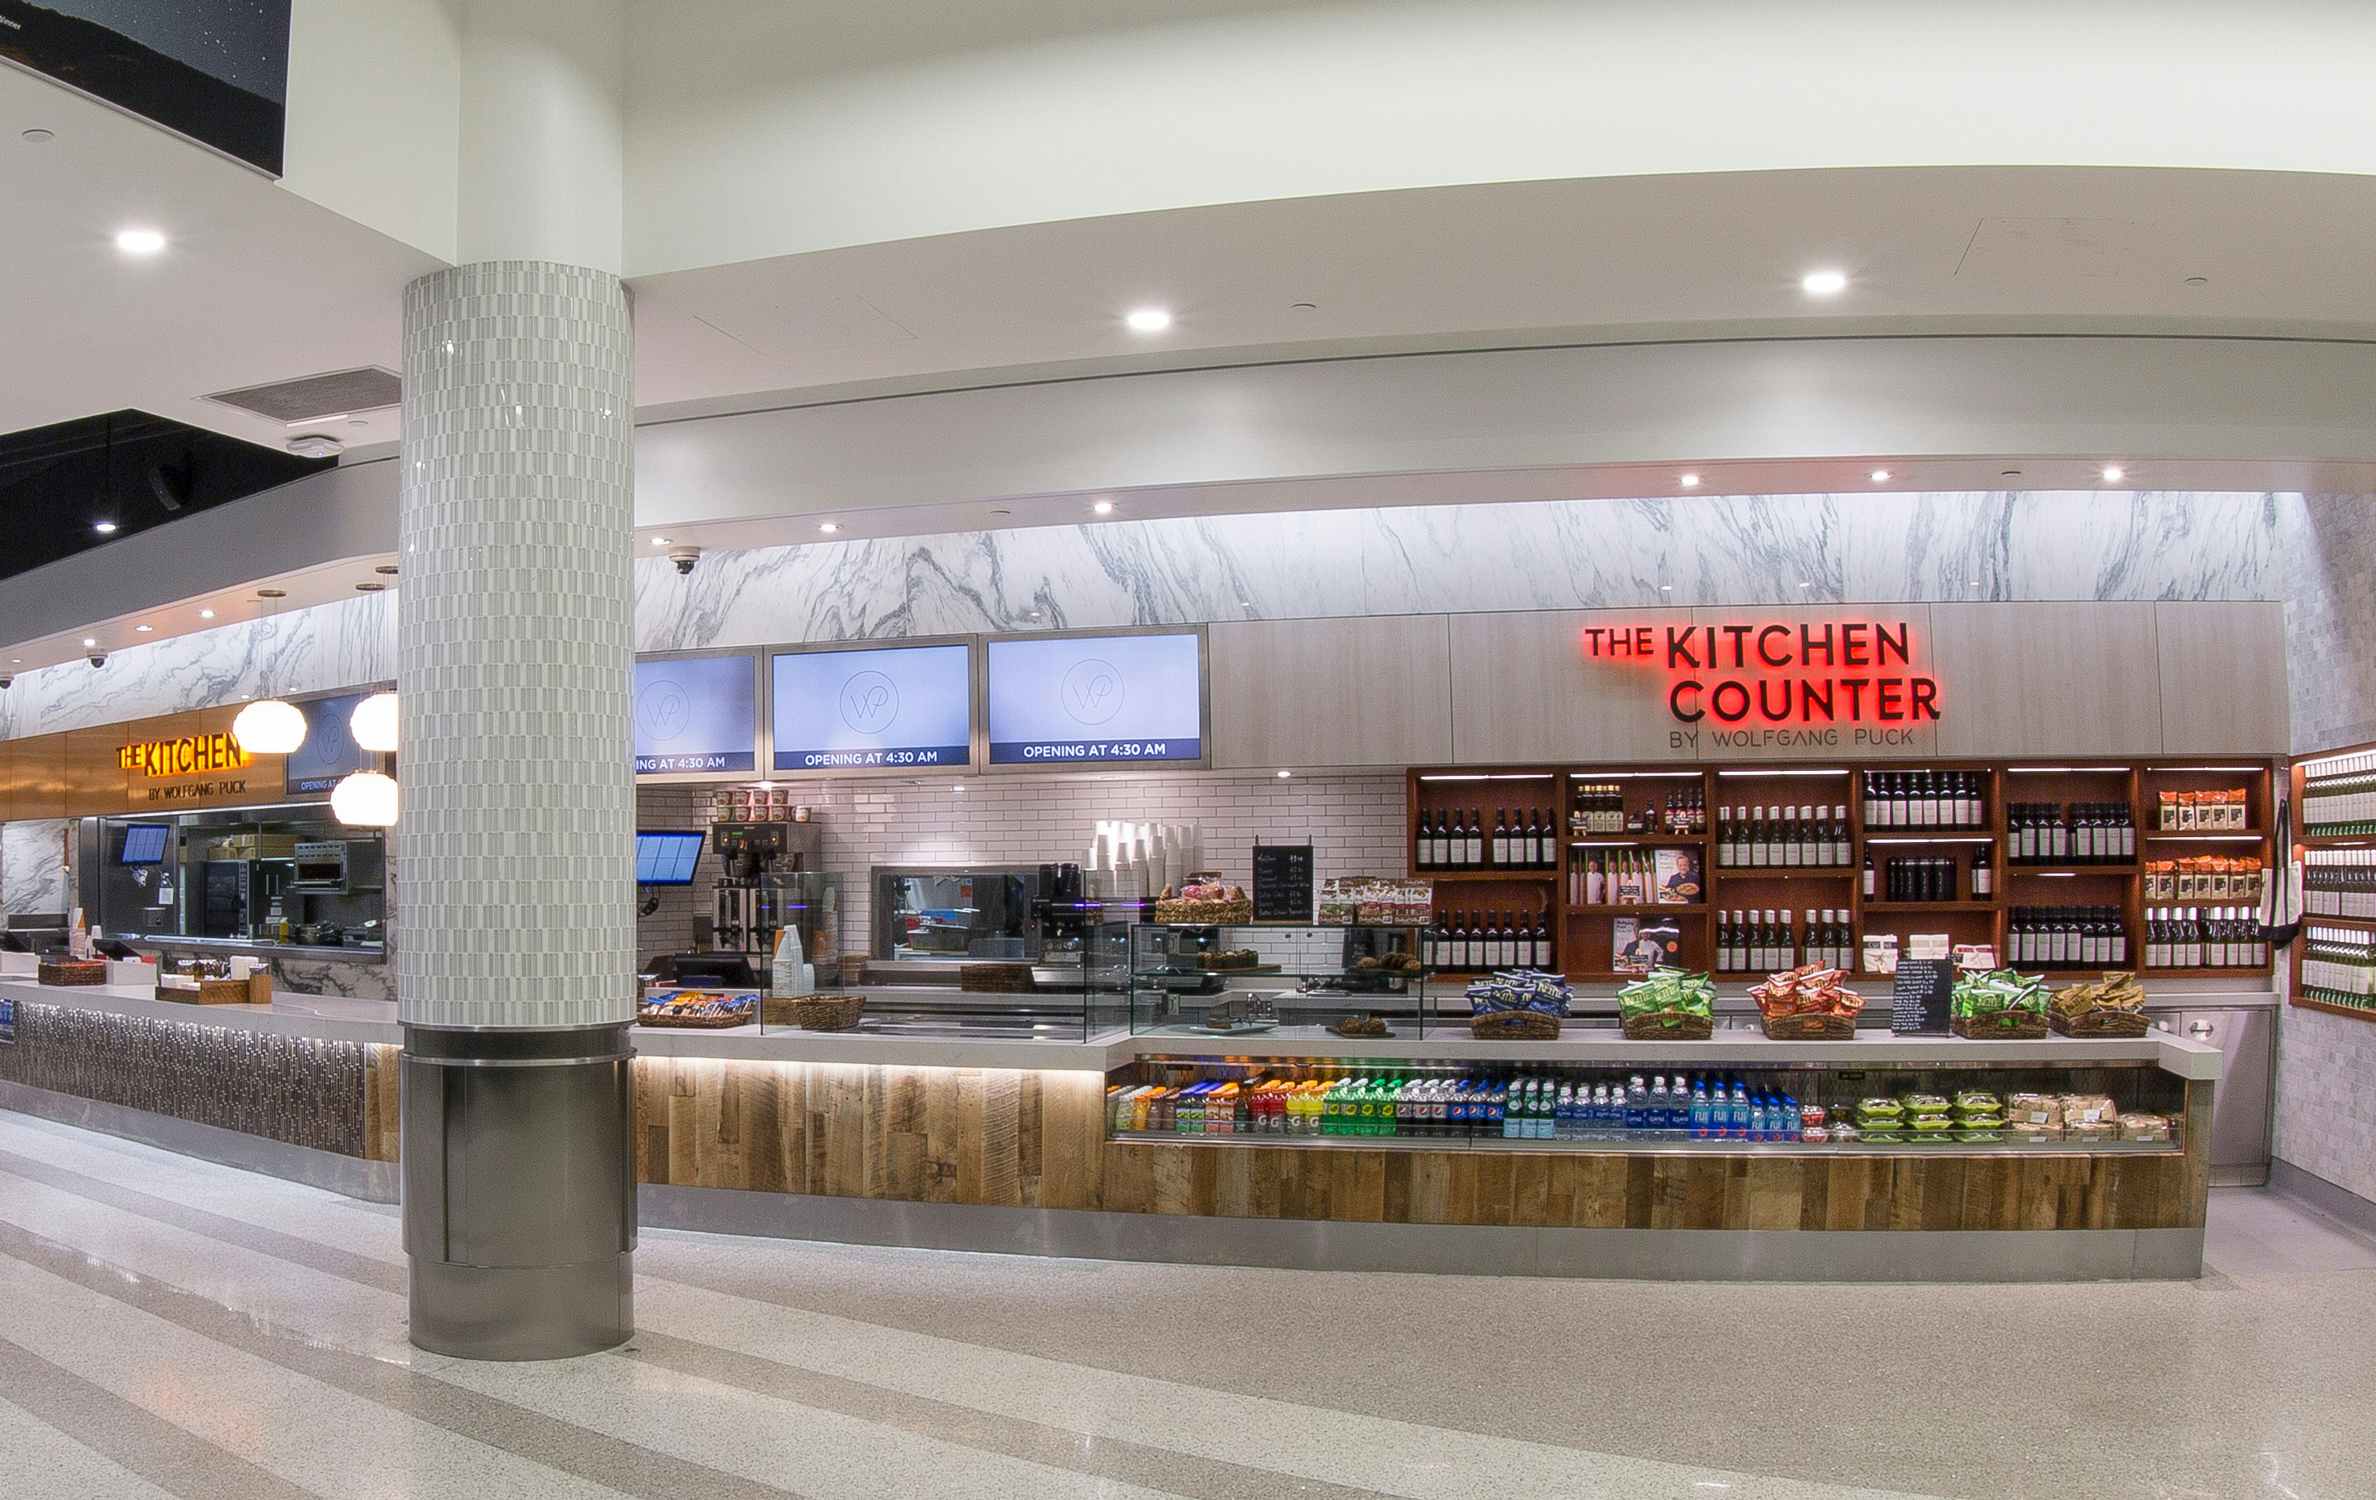 The Kitchen Counter deli and snacks in LAX airport